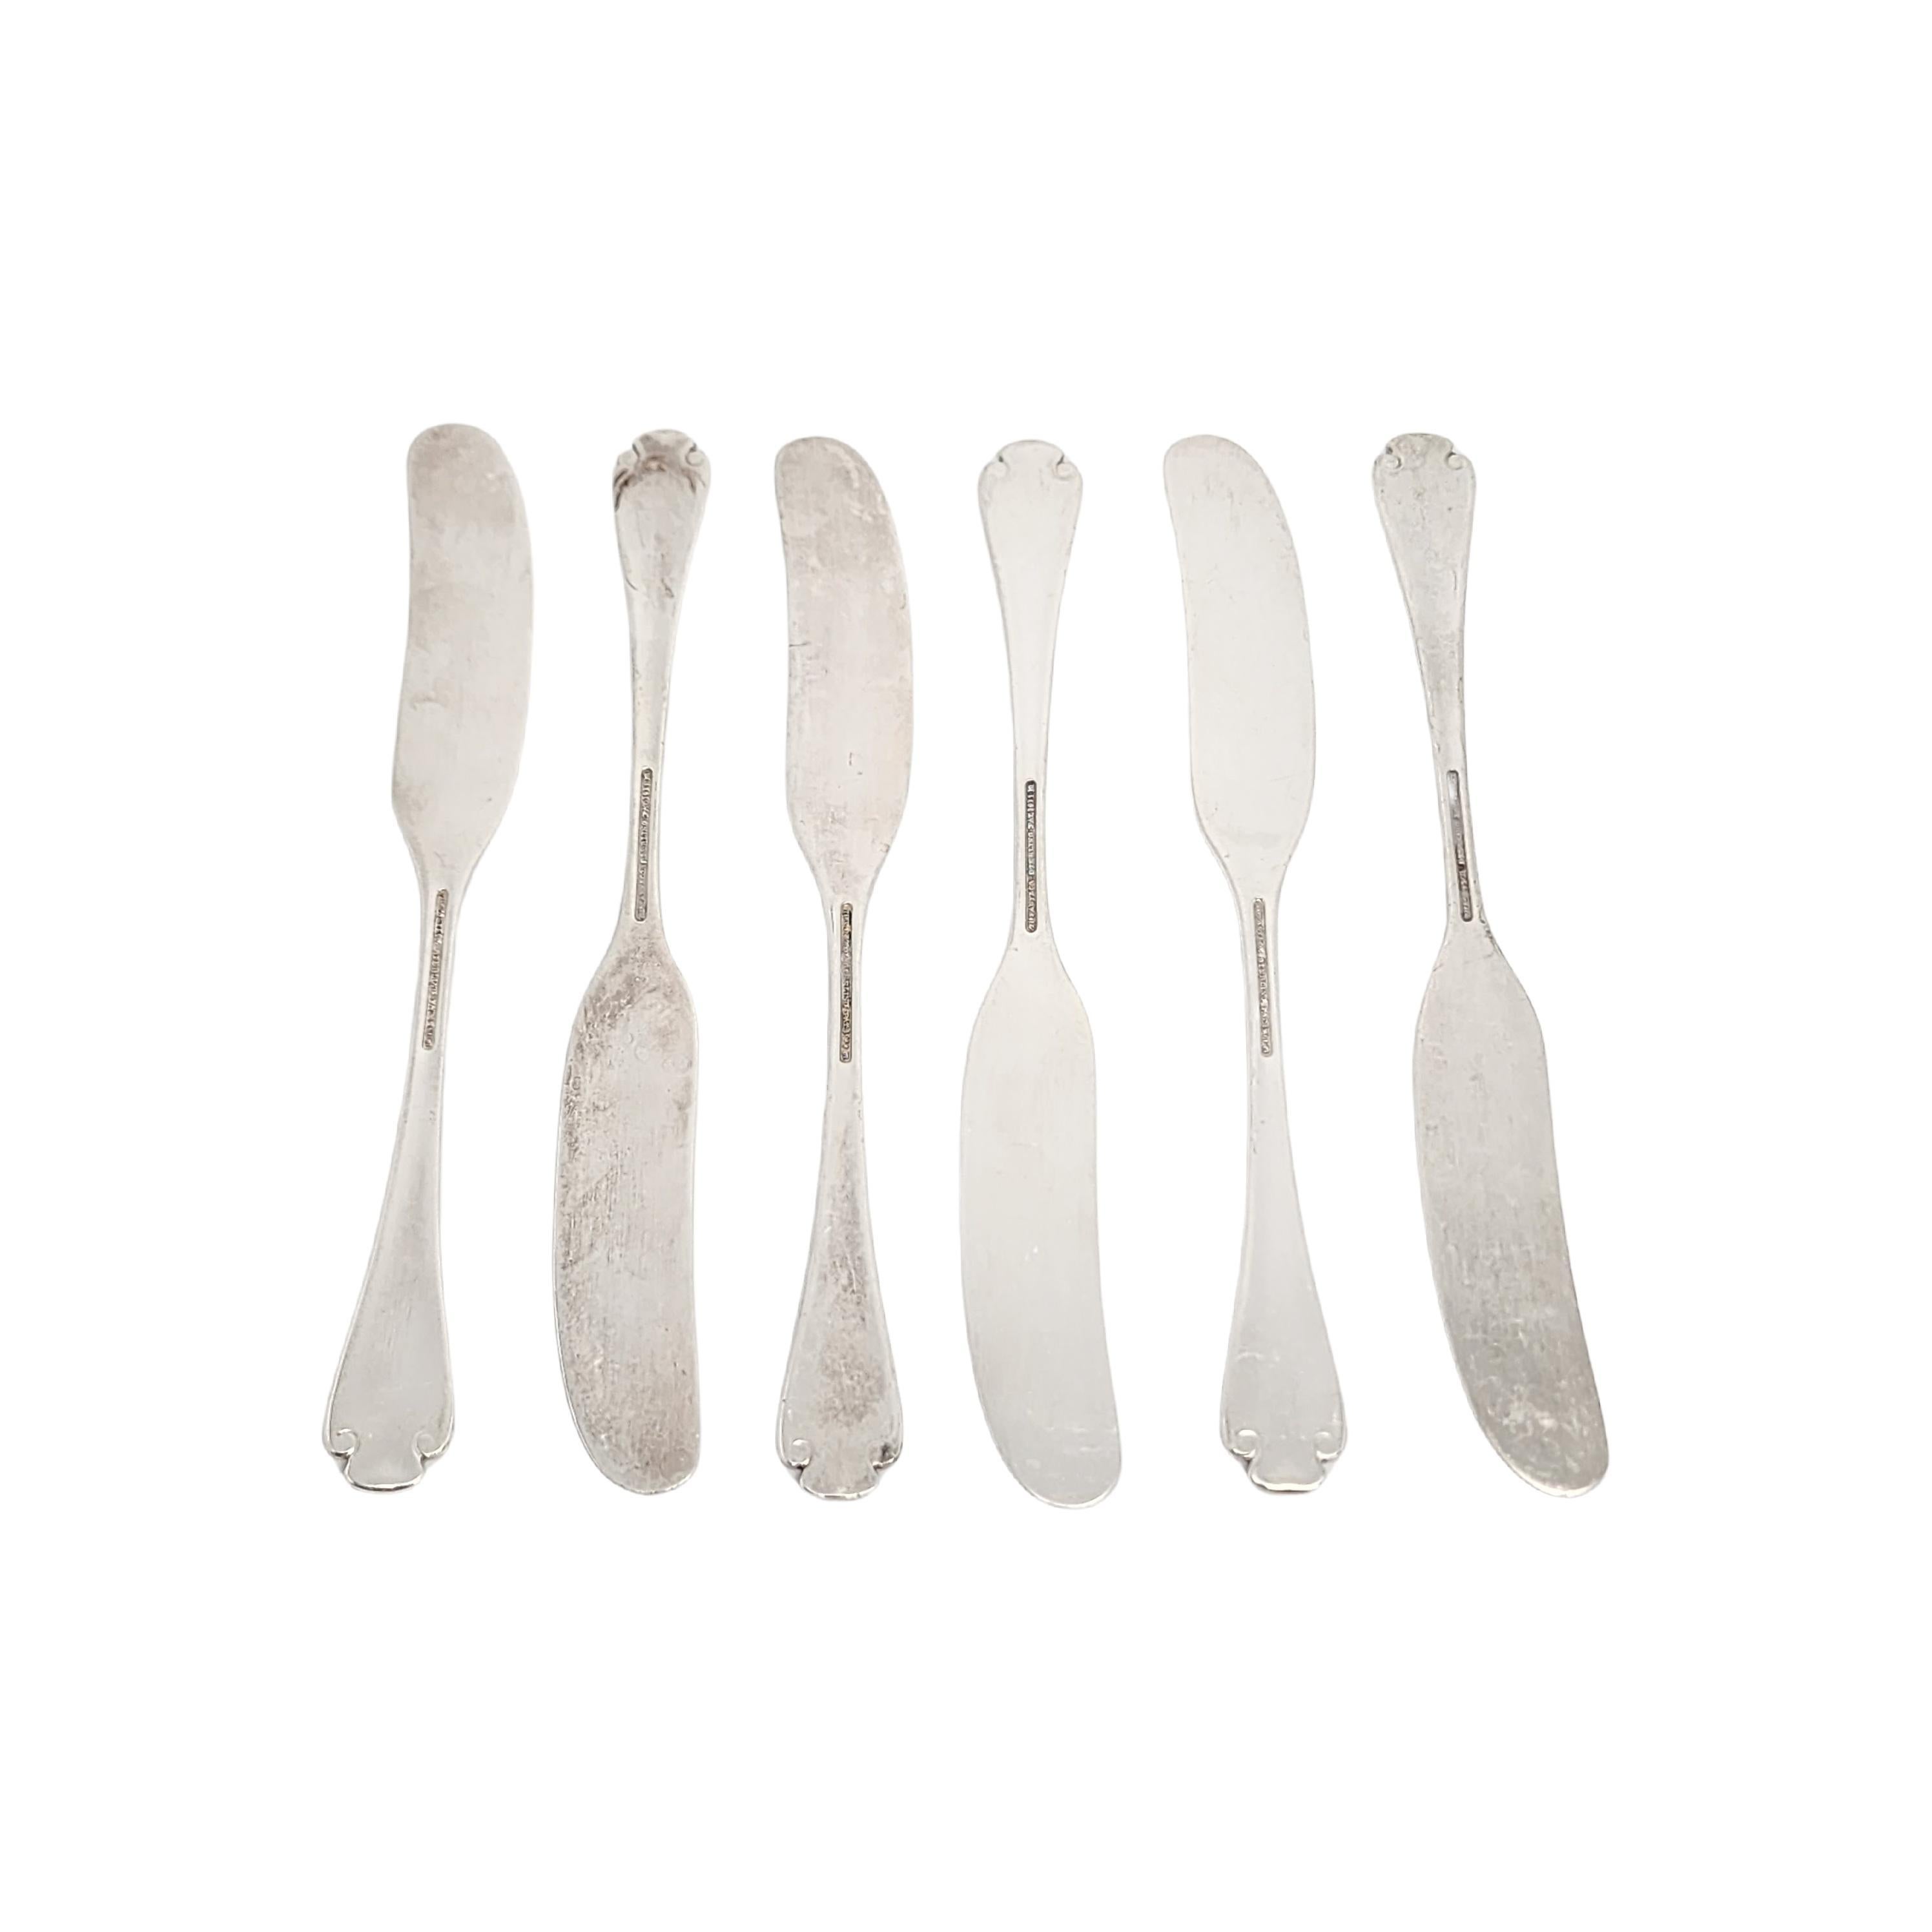 Set of 6 sterling silver flat handle butter spreaders by Tiffany & Co in the Flemish pattern.

No monogram.

The Flemish pattern features a simple and elegant scroll design, making it a timeless classic that is still in demand today. Hallmarks date